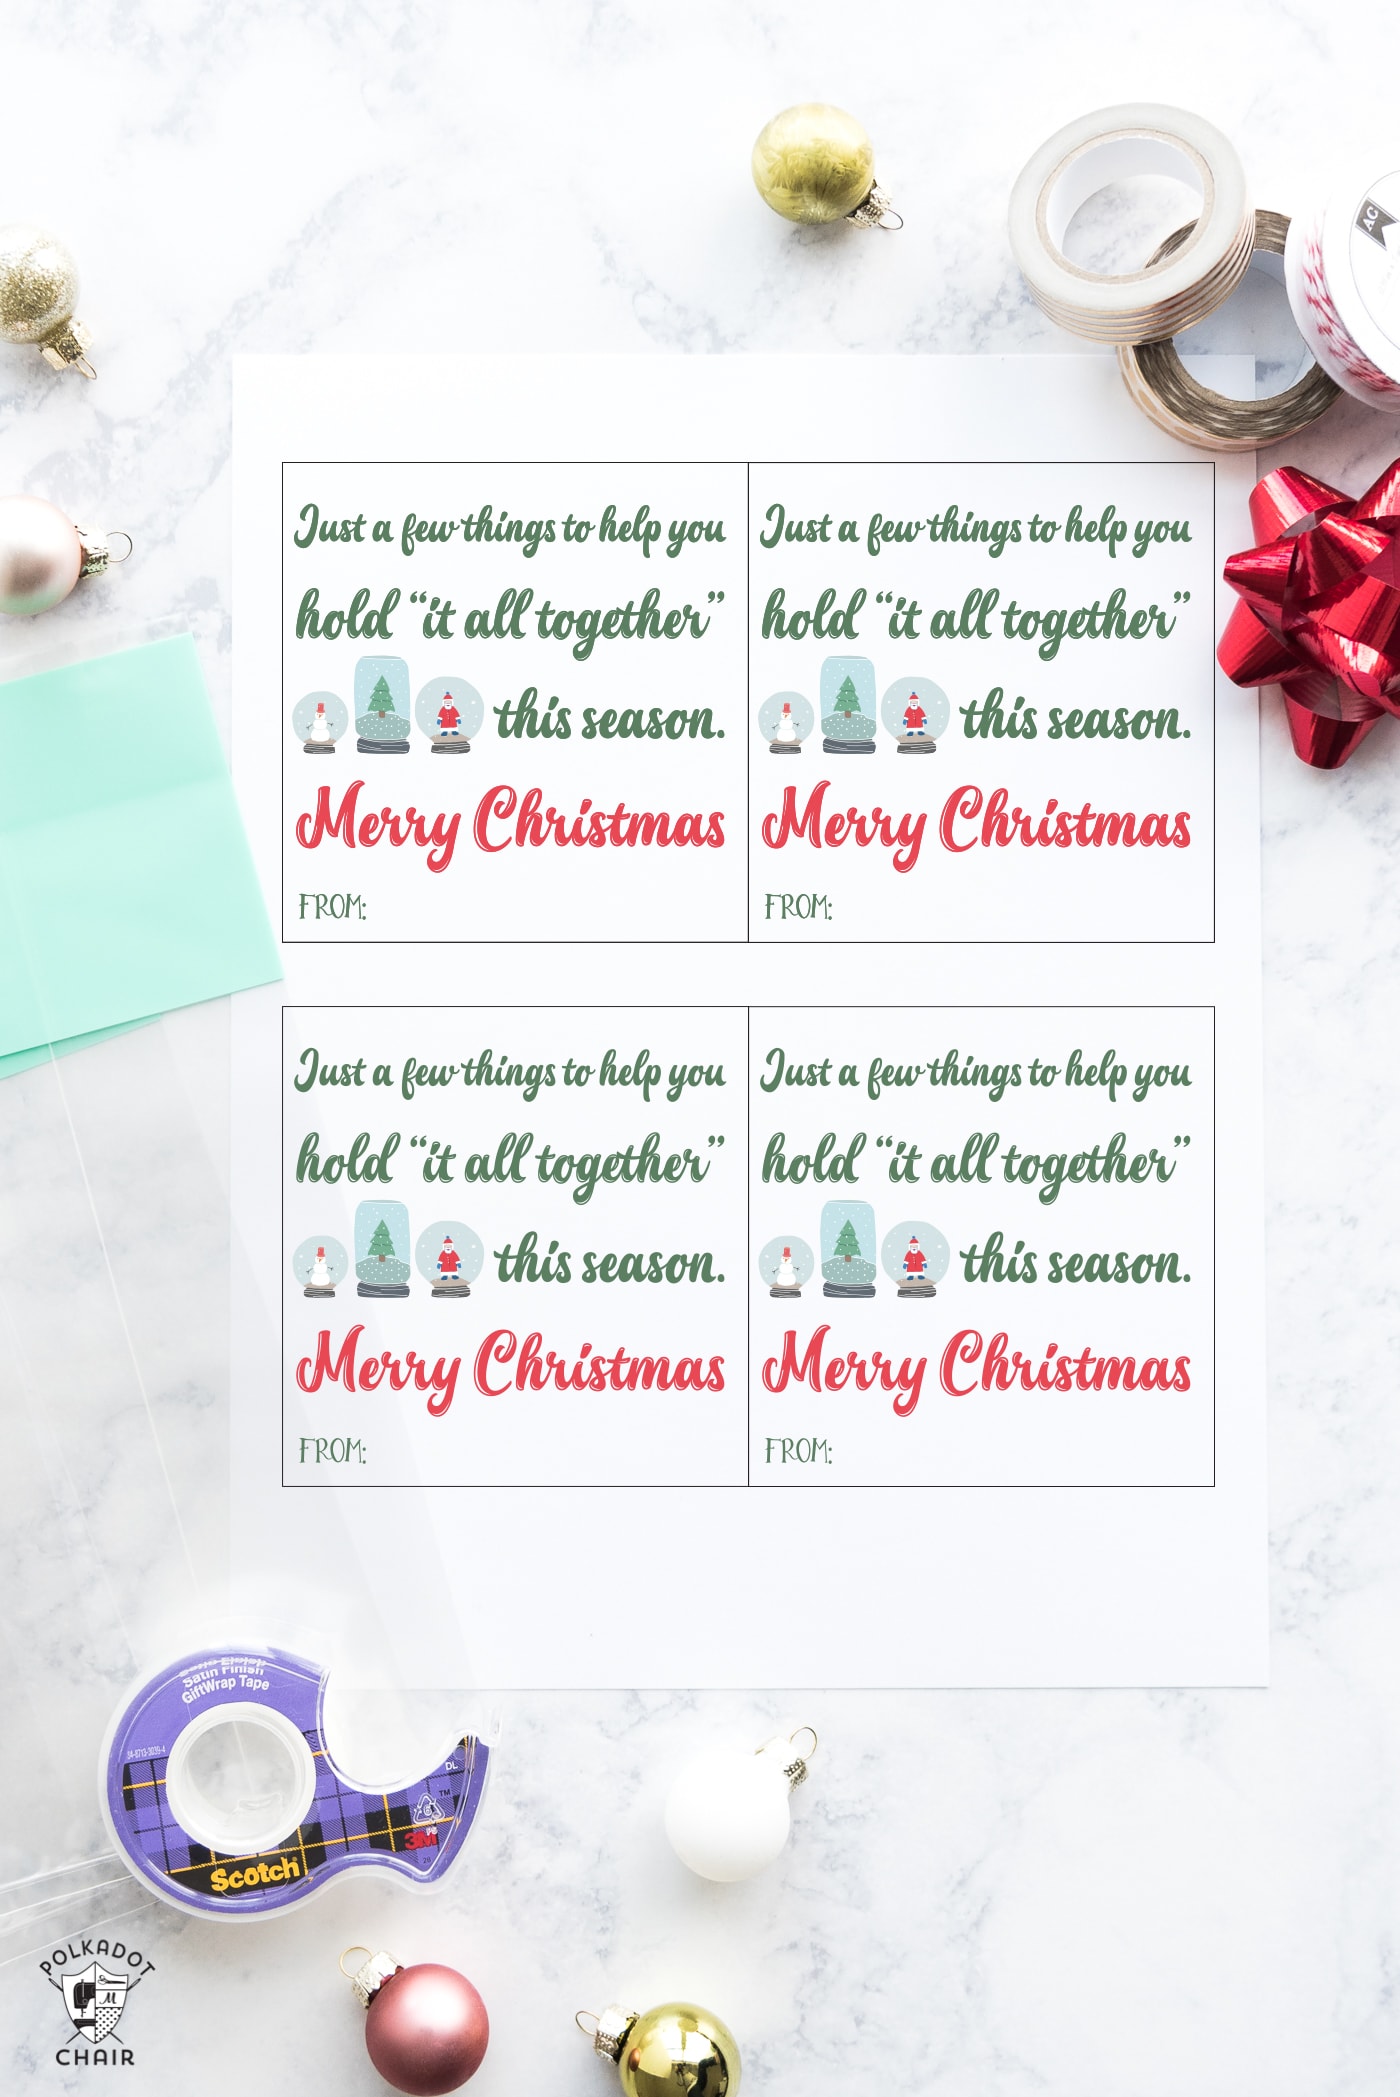 https://www.polkadotchair.com/wp-content/uploads/2017/12/free-christmas-tag-neighbor-gift-download.jpg